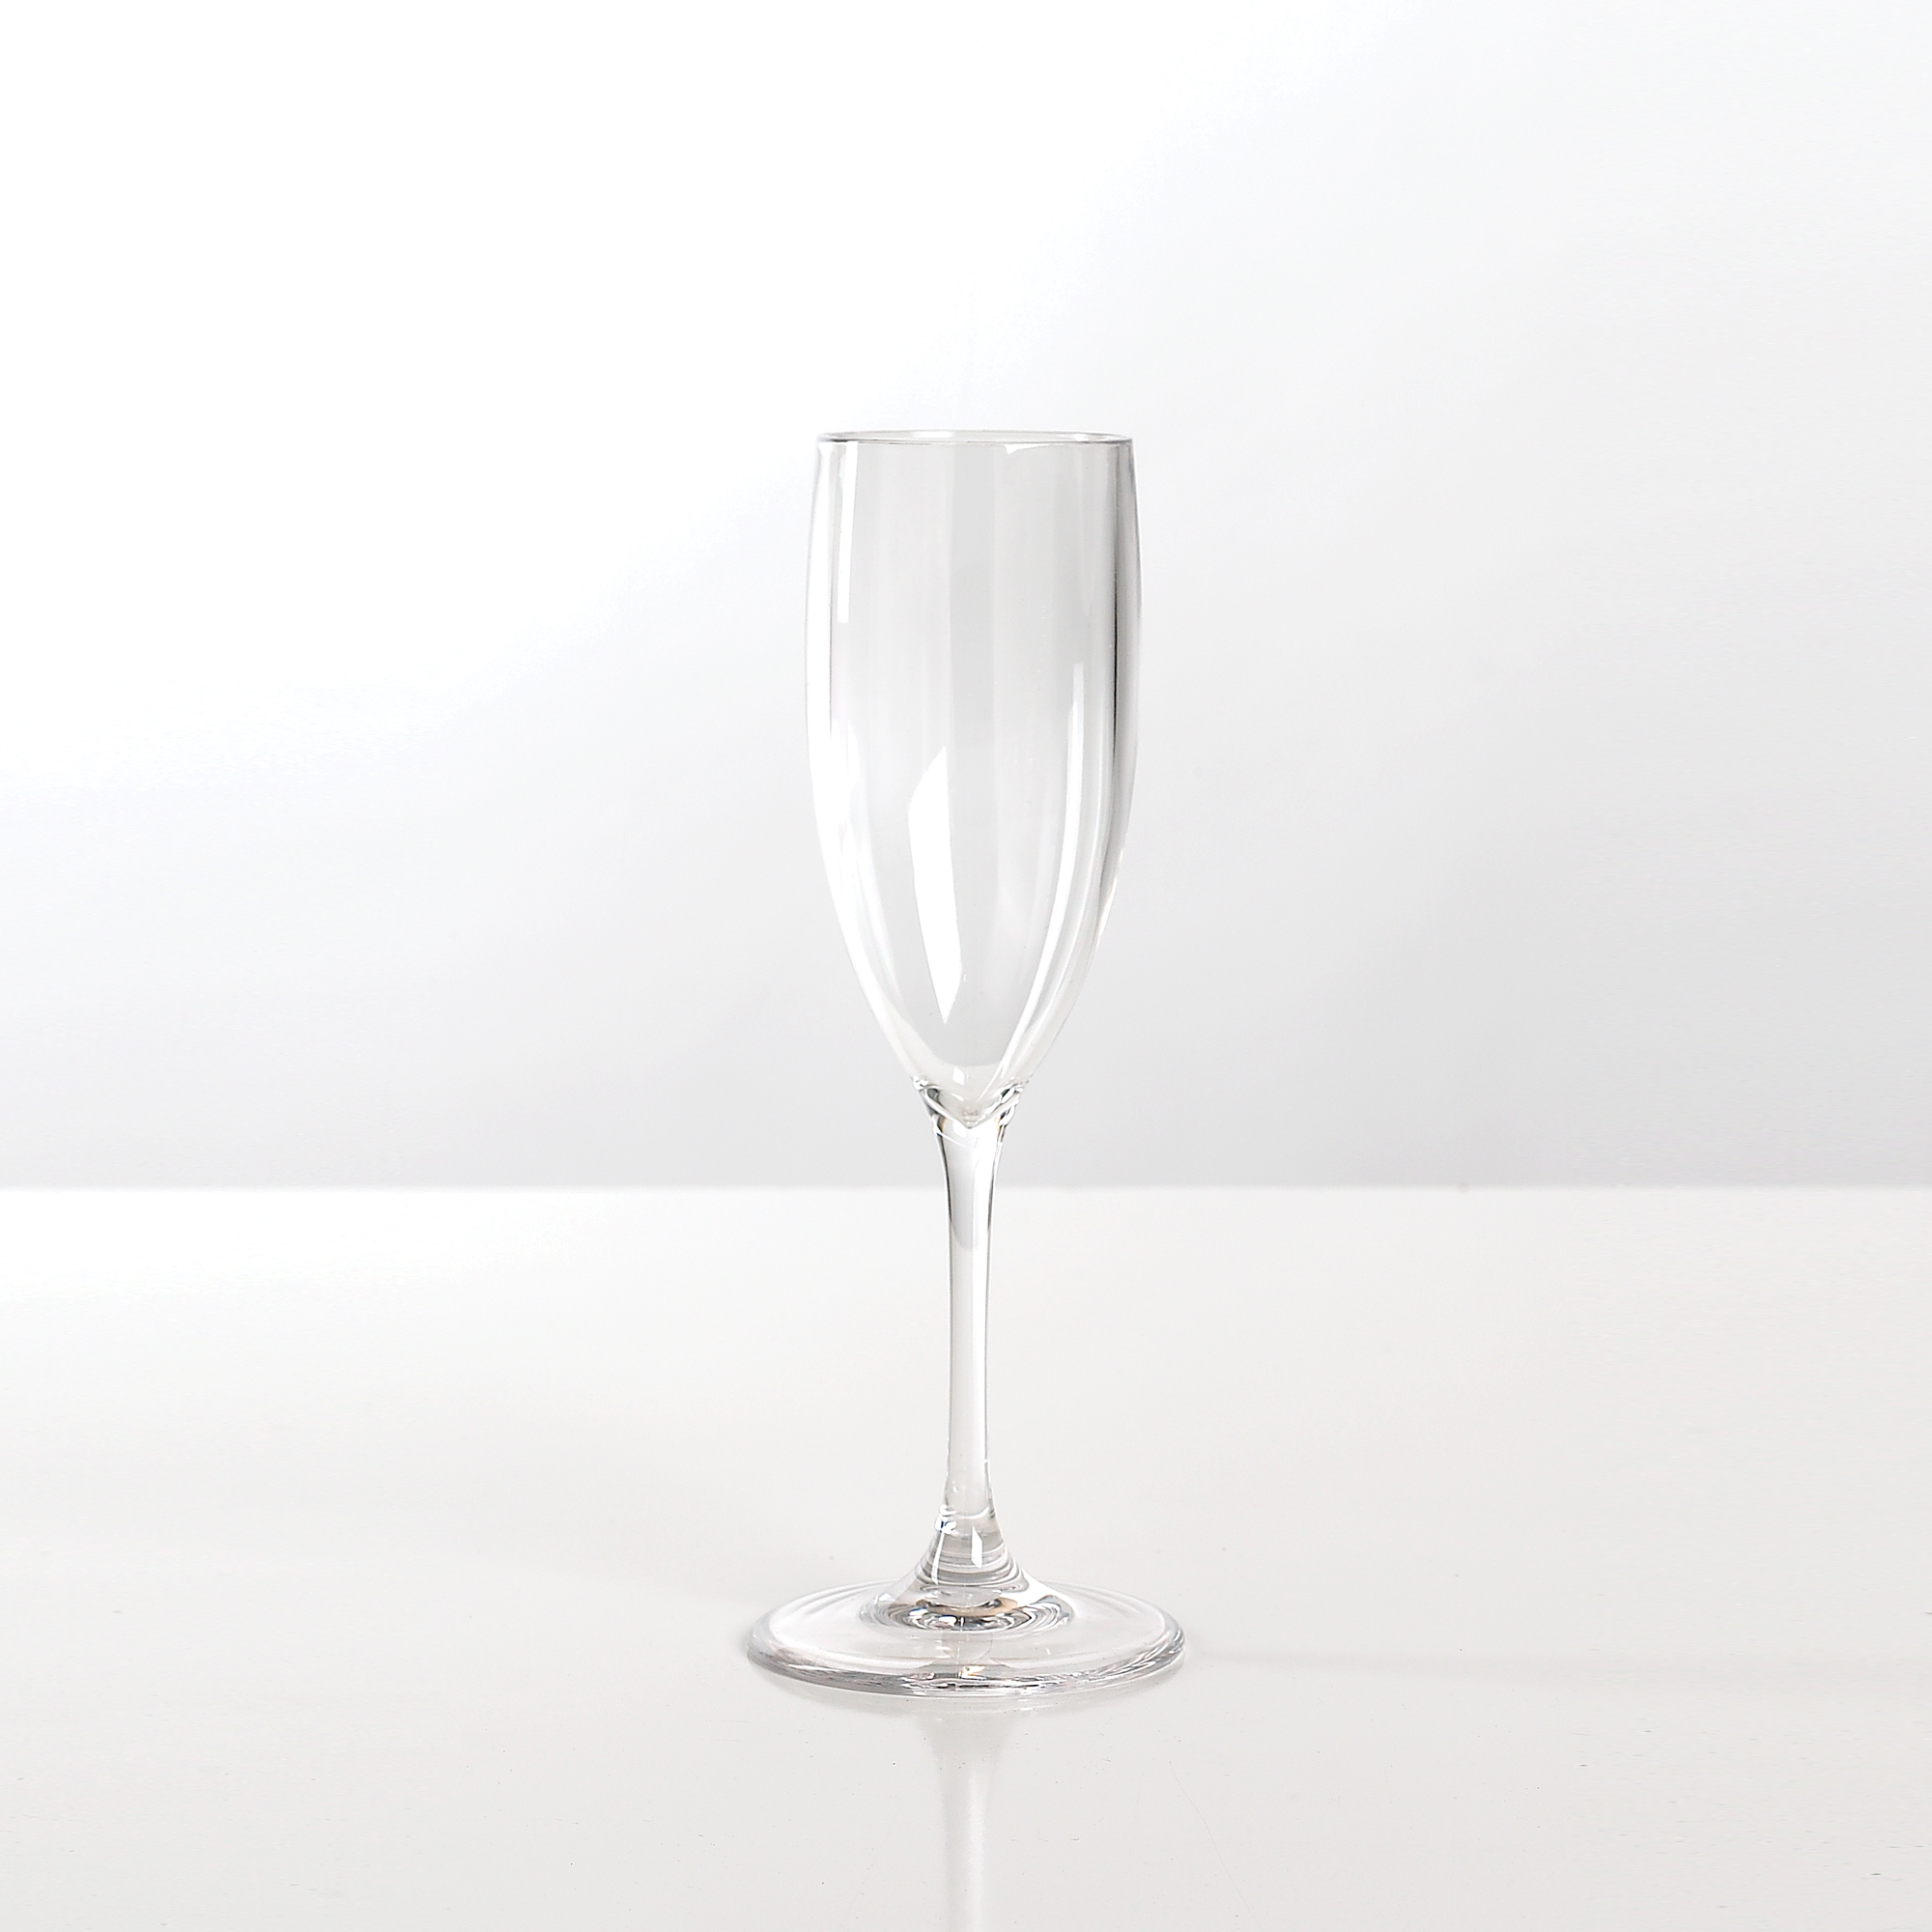 Pack of 2 Unbreakable Polycarbonate Black Champagne Flutes 180ml 6oz